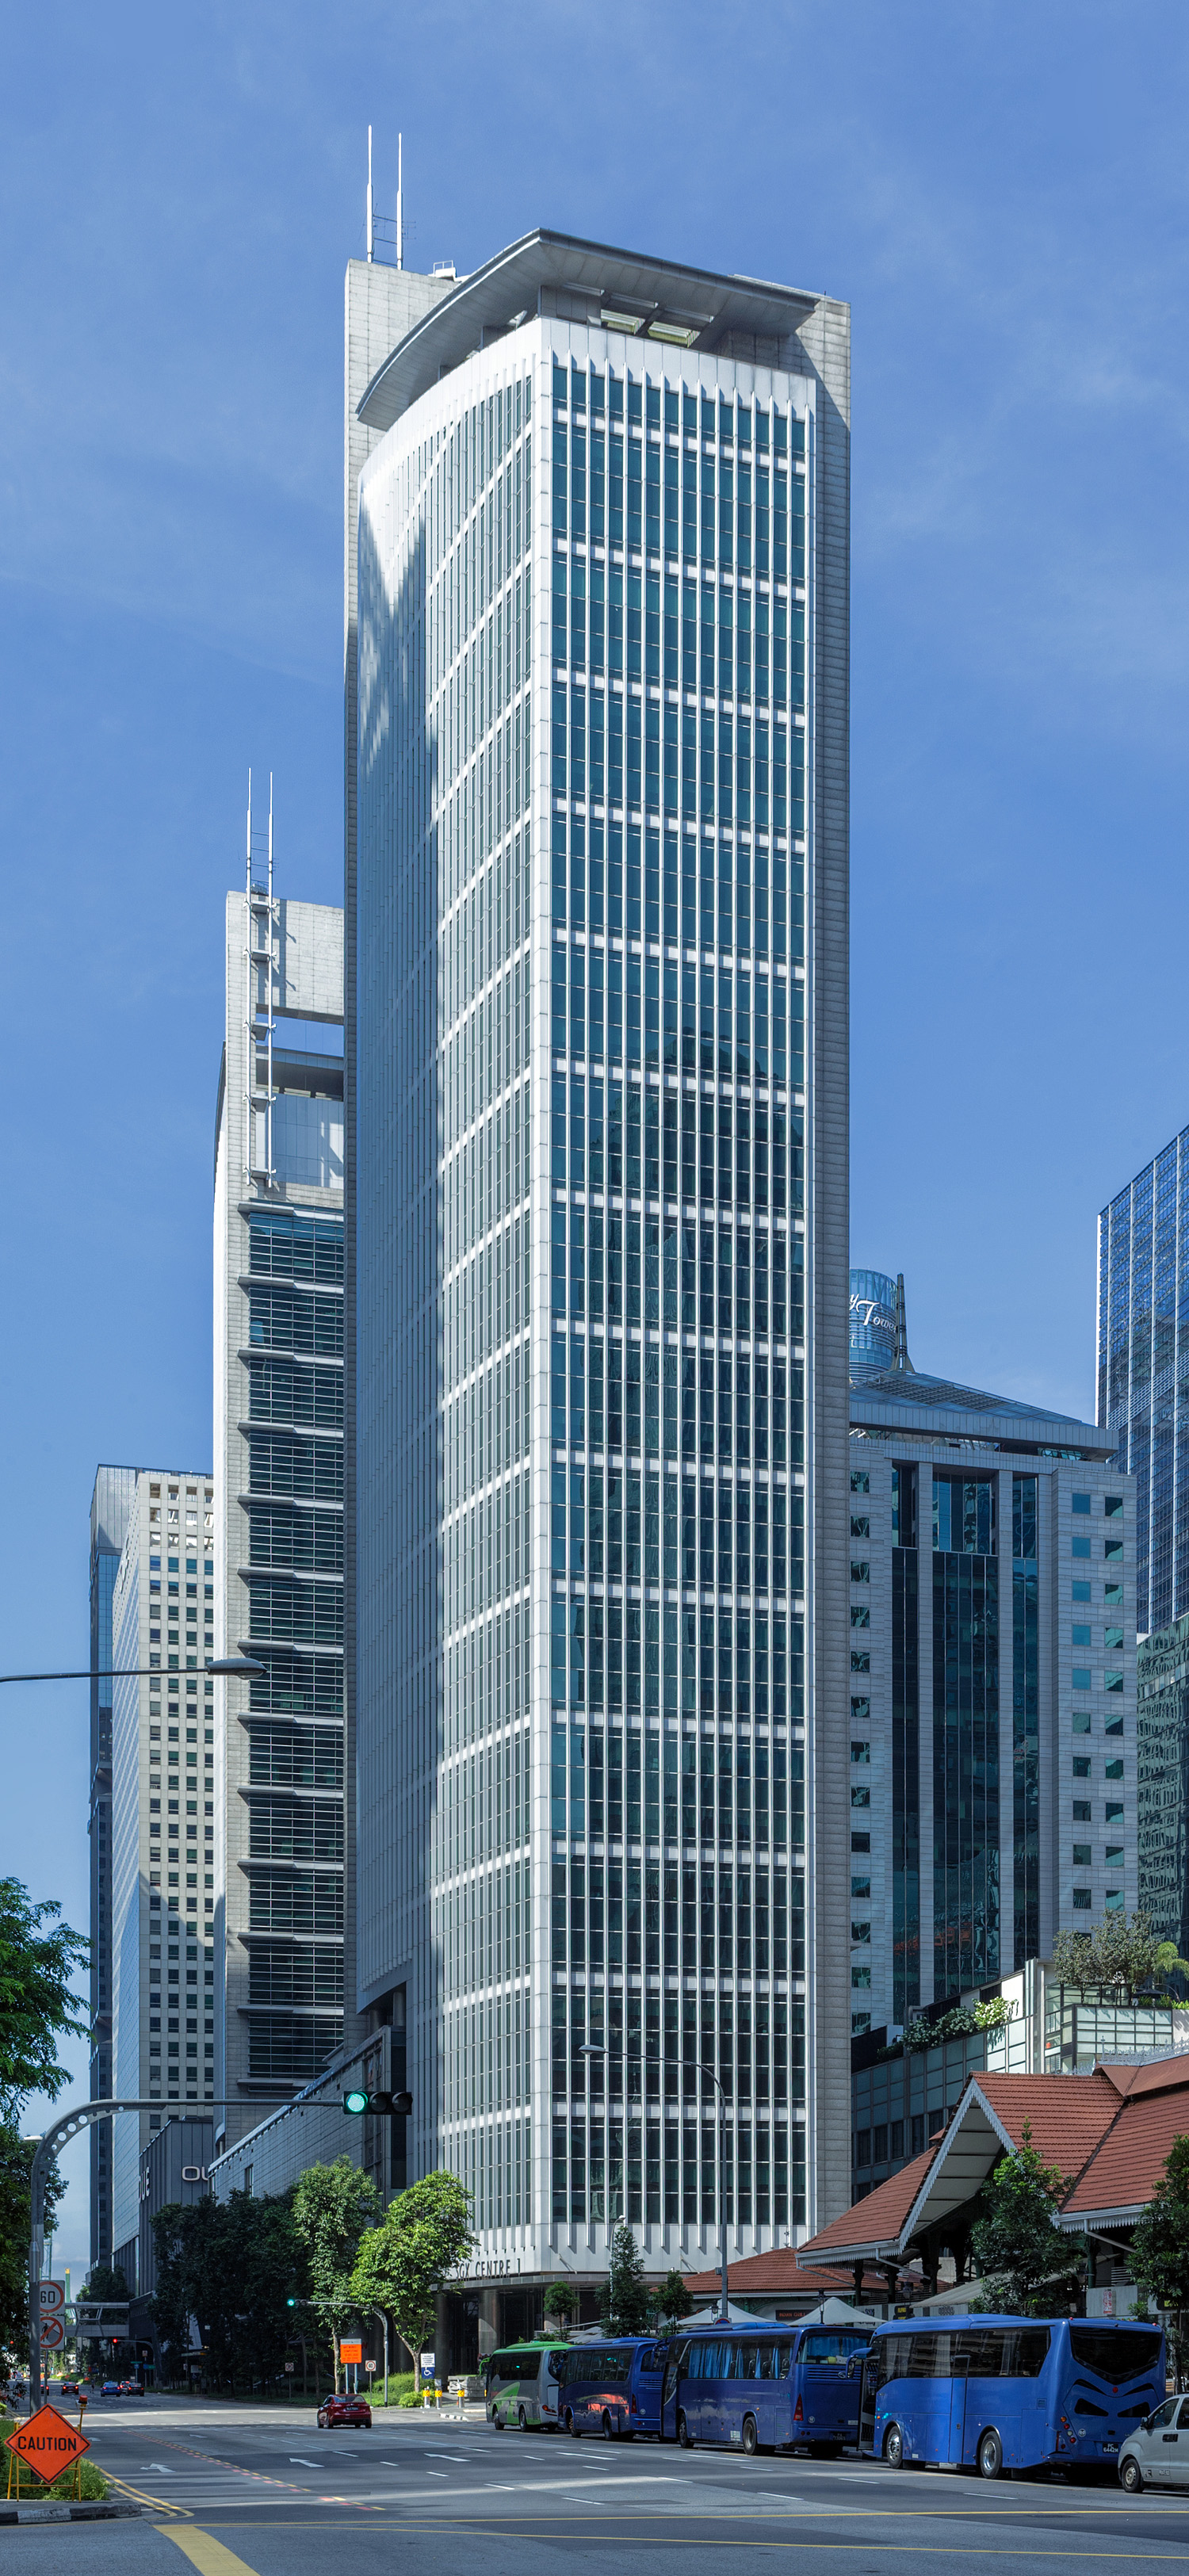 SGX Centre 1, Singapore - View from the northeast. © Mathias Beinling